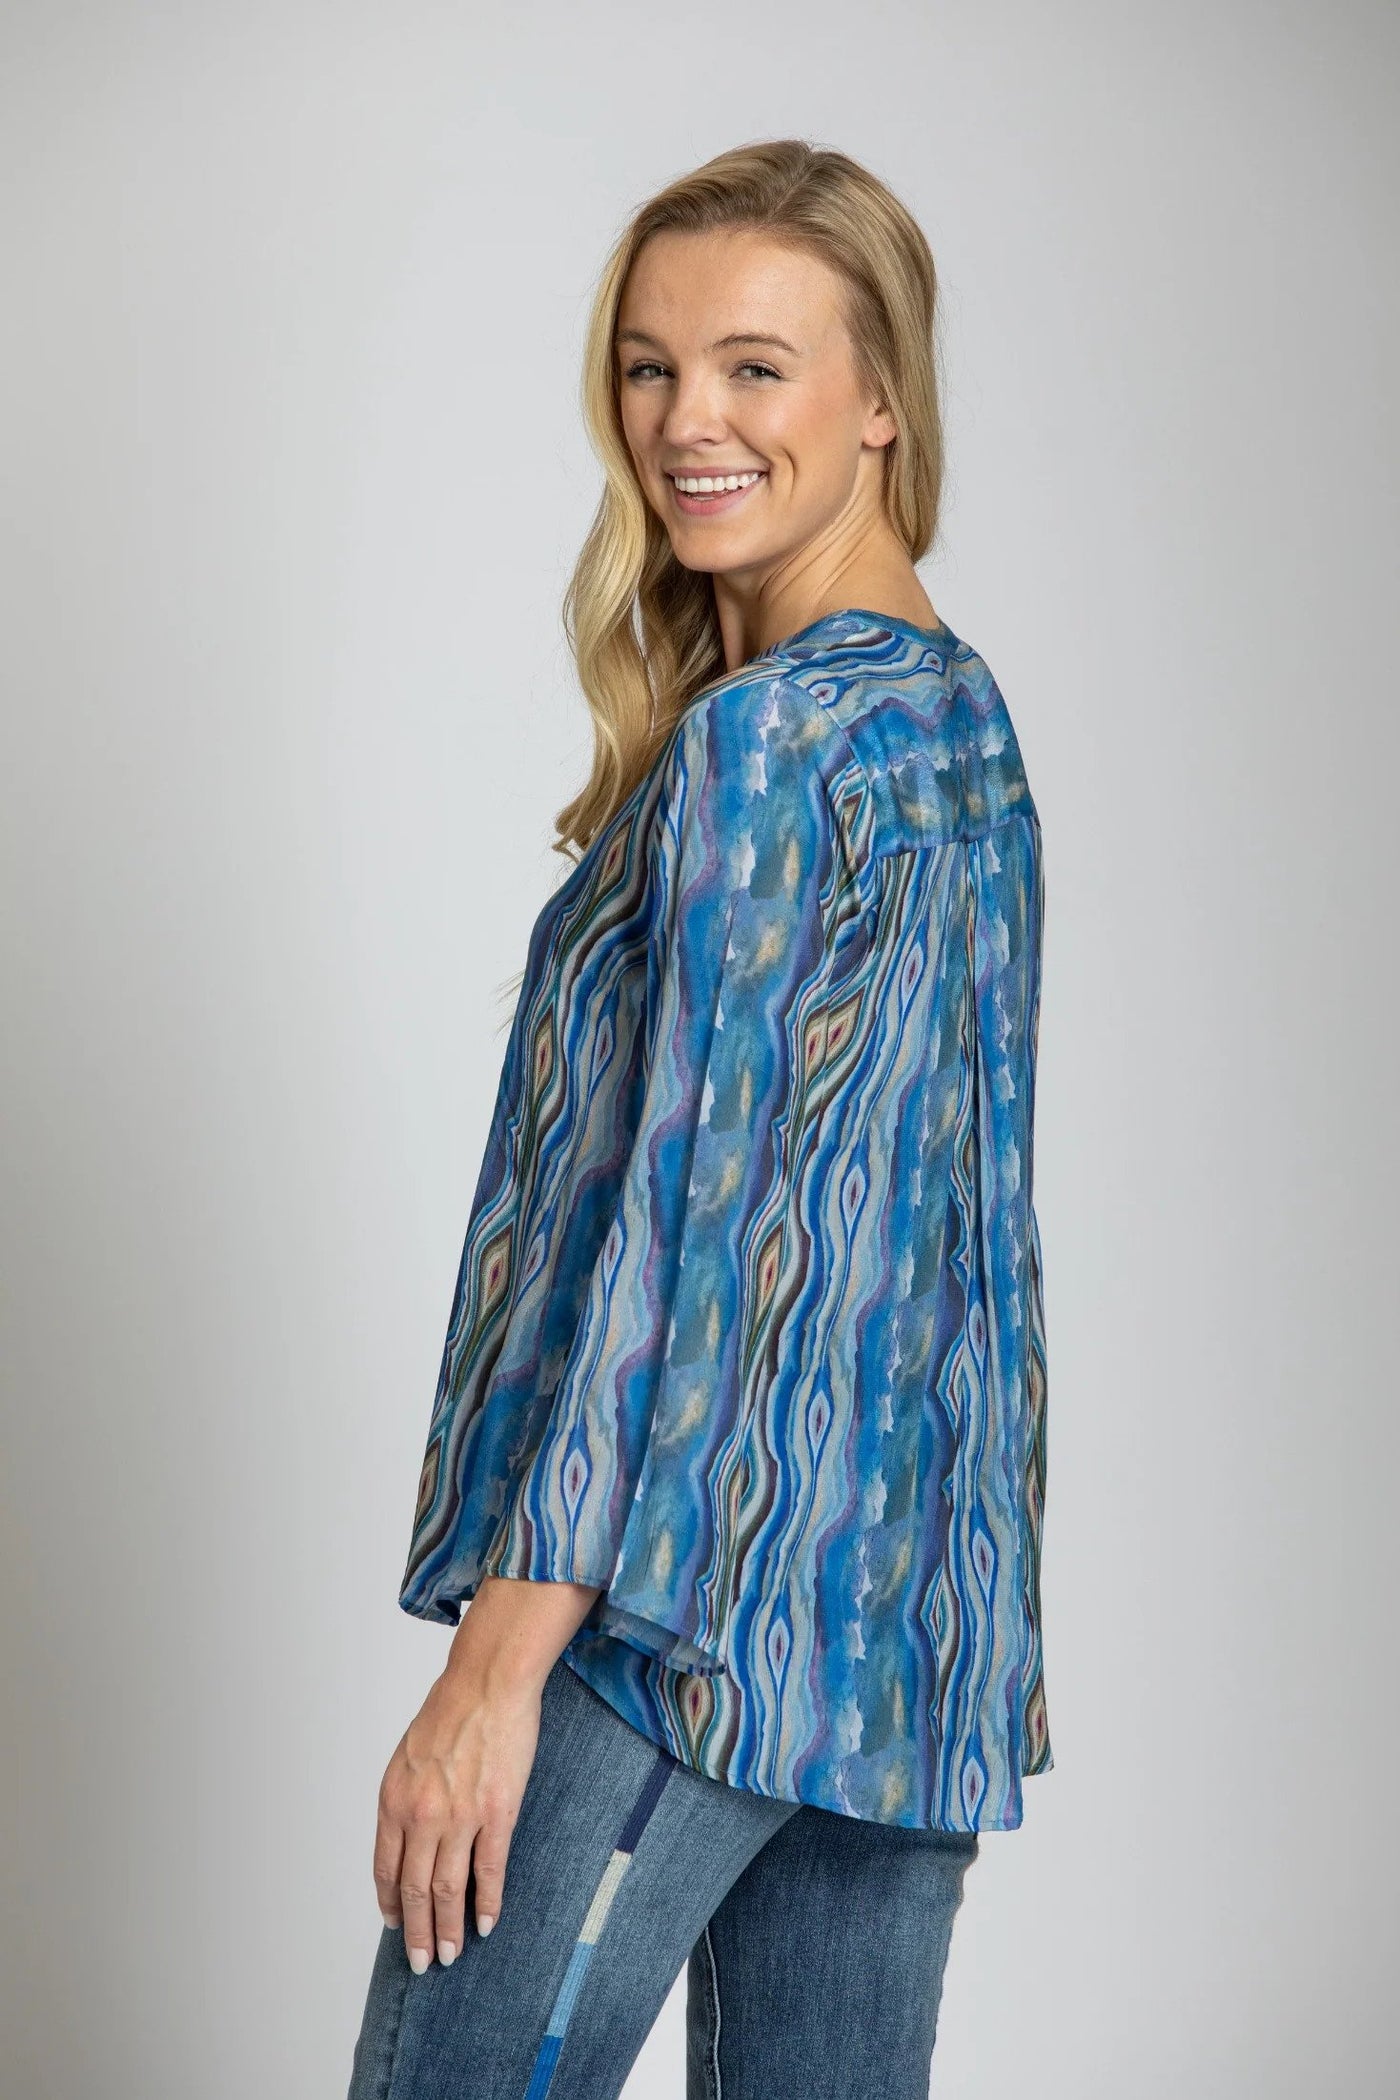 Blue Abalone Inspired Print with Tasseled V-Neck Top Looking Over Shoulder.